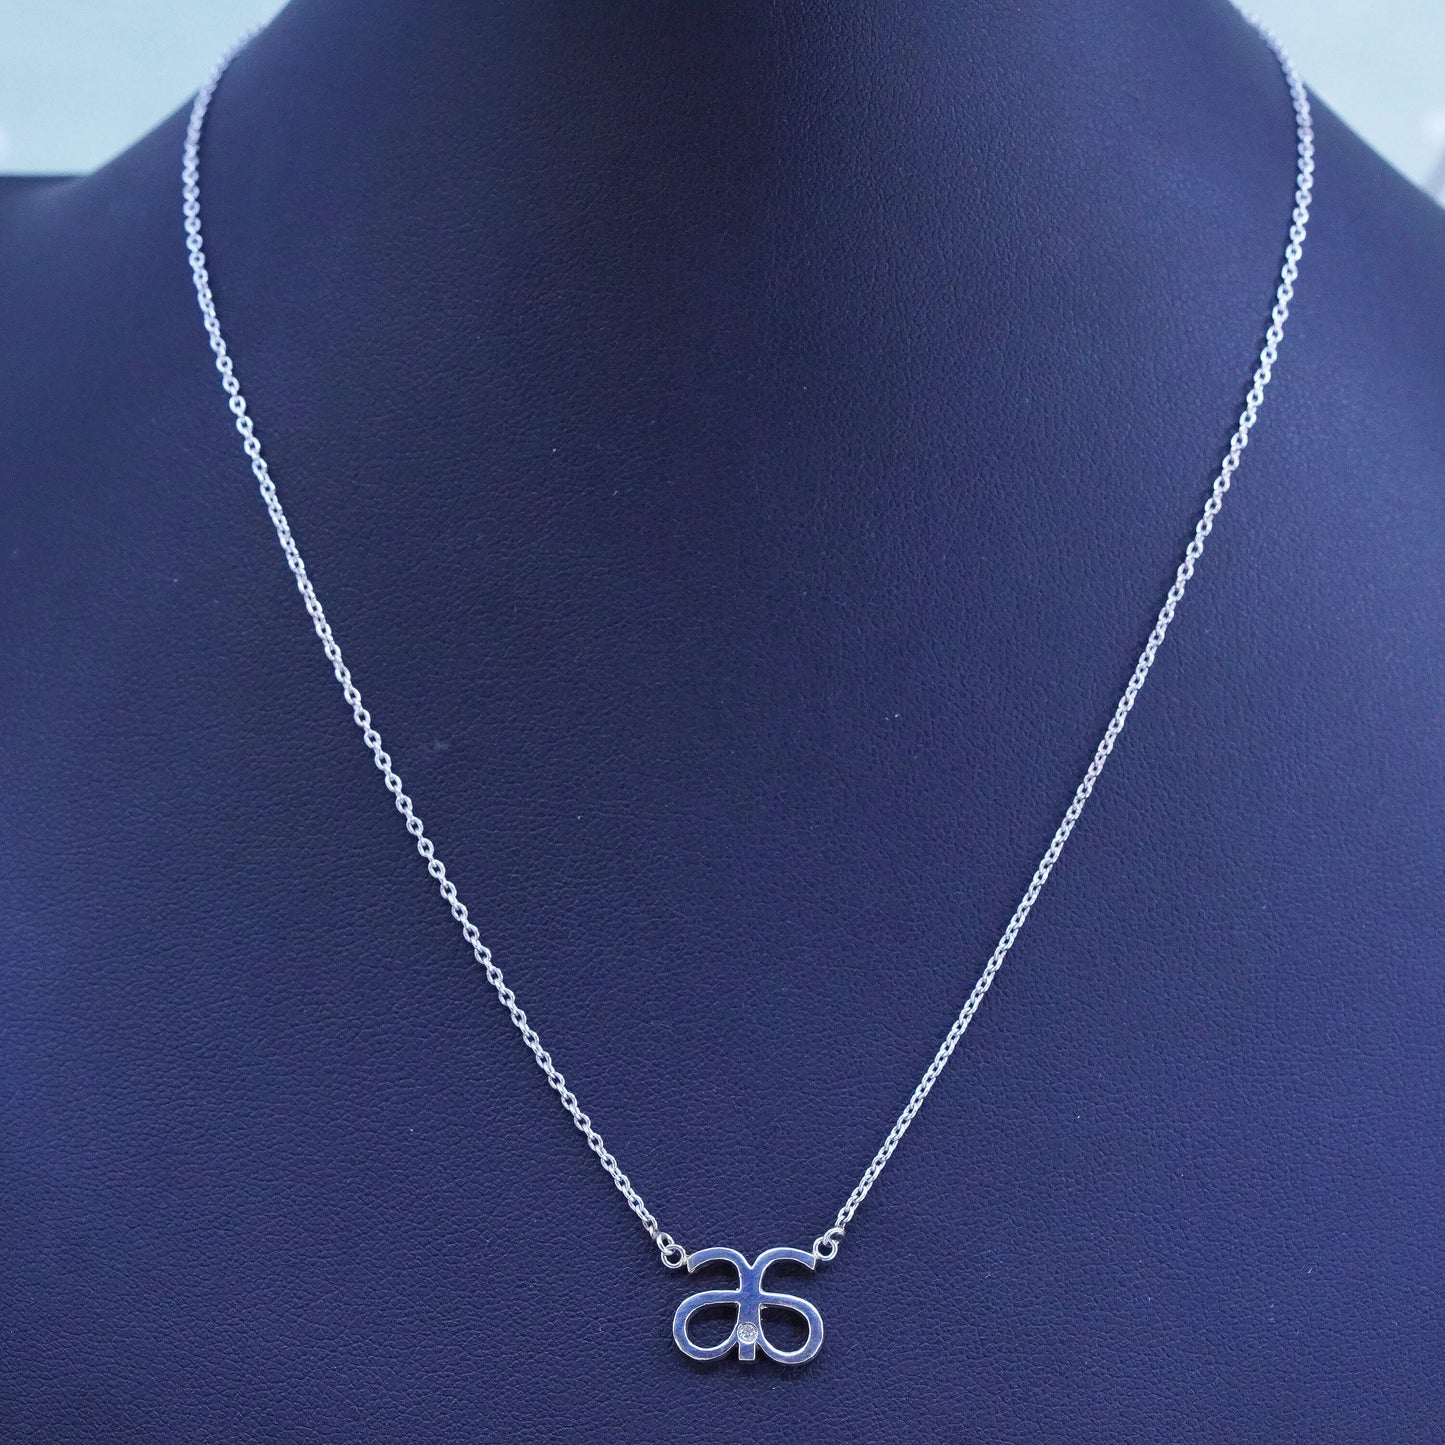 16”, Sterling silver necklace, 925 circle chain with double a pendant diamond